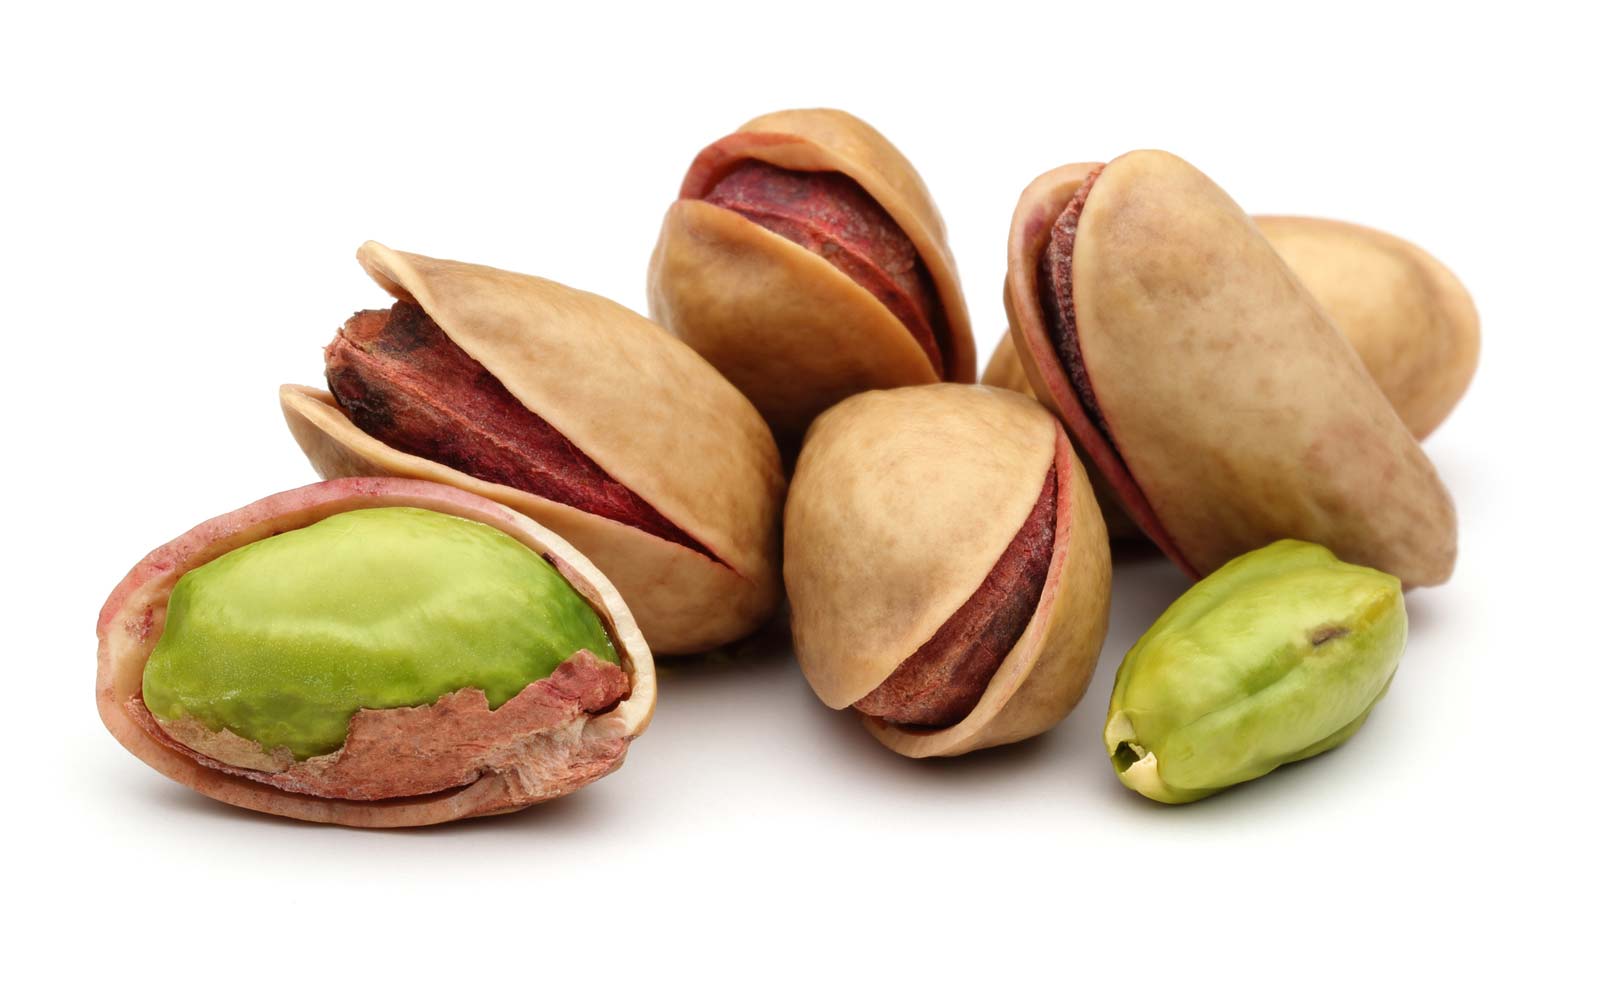 Fresh pistachio kernels buying guide + great price